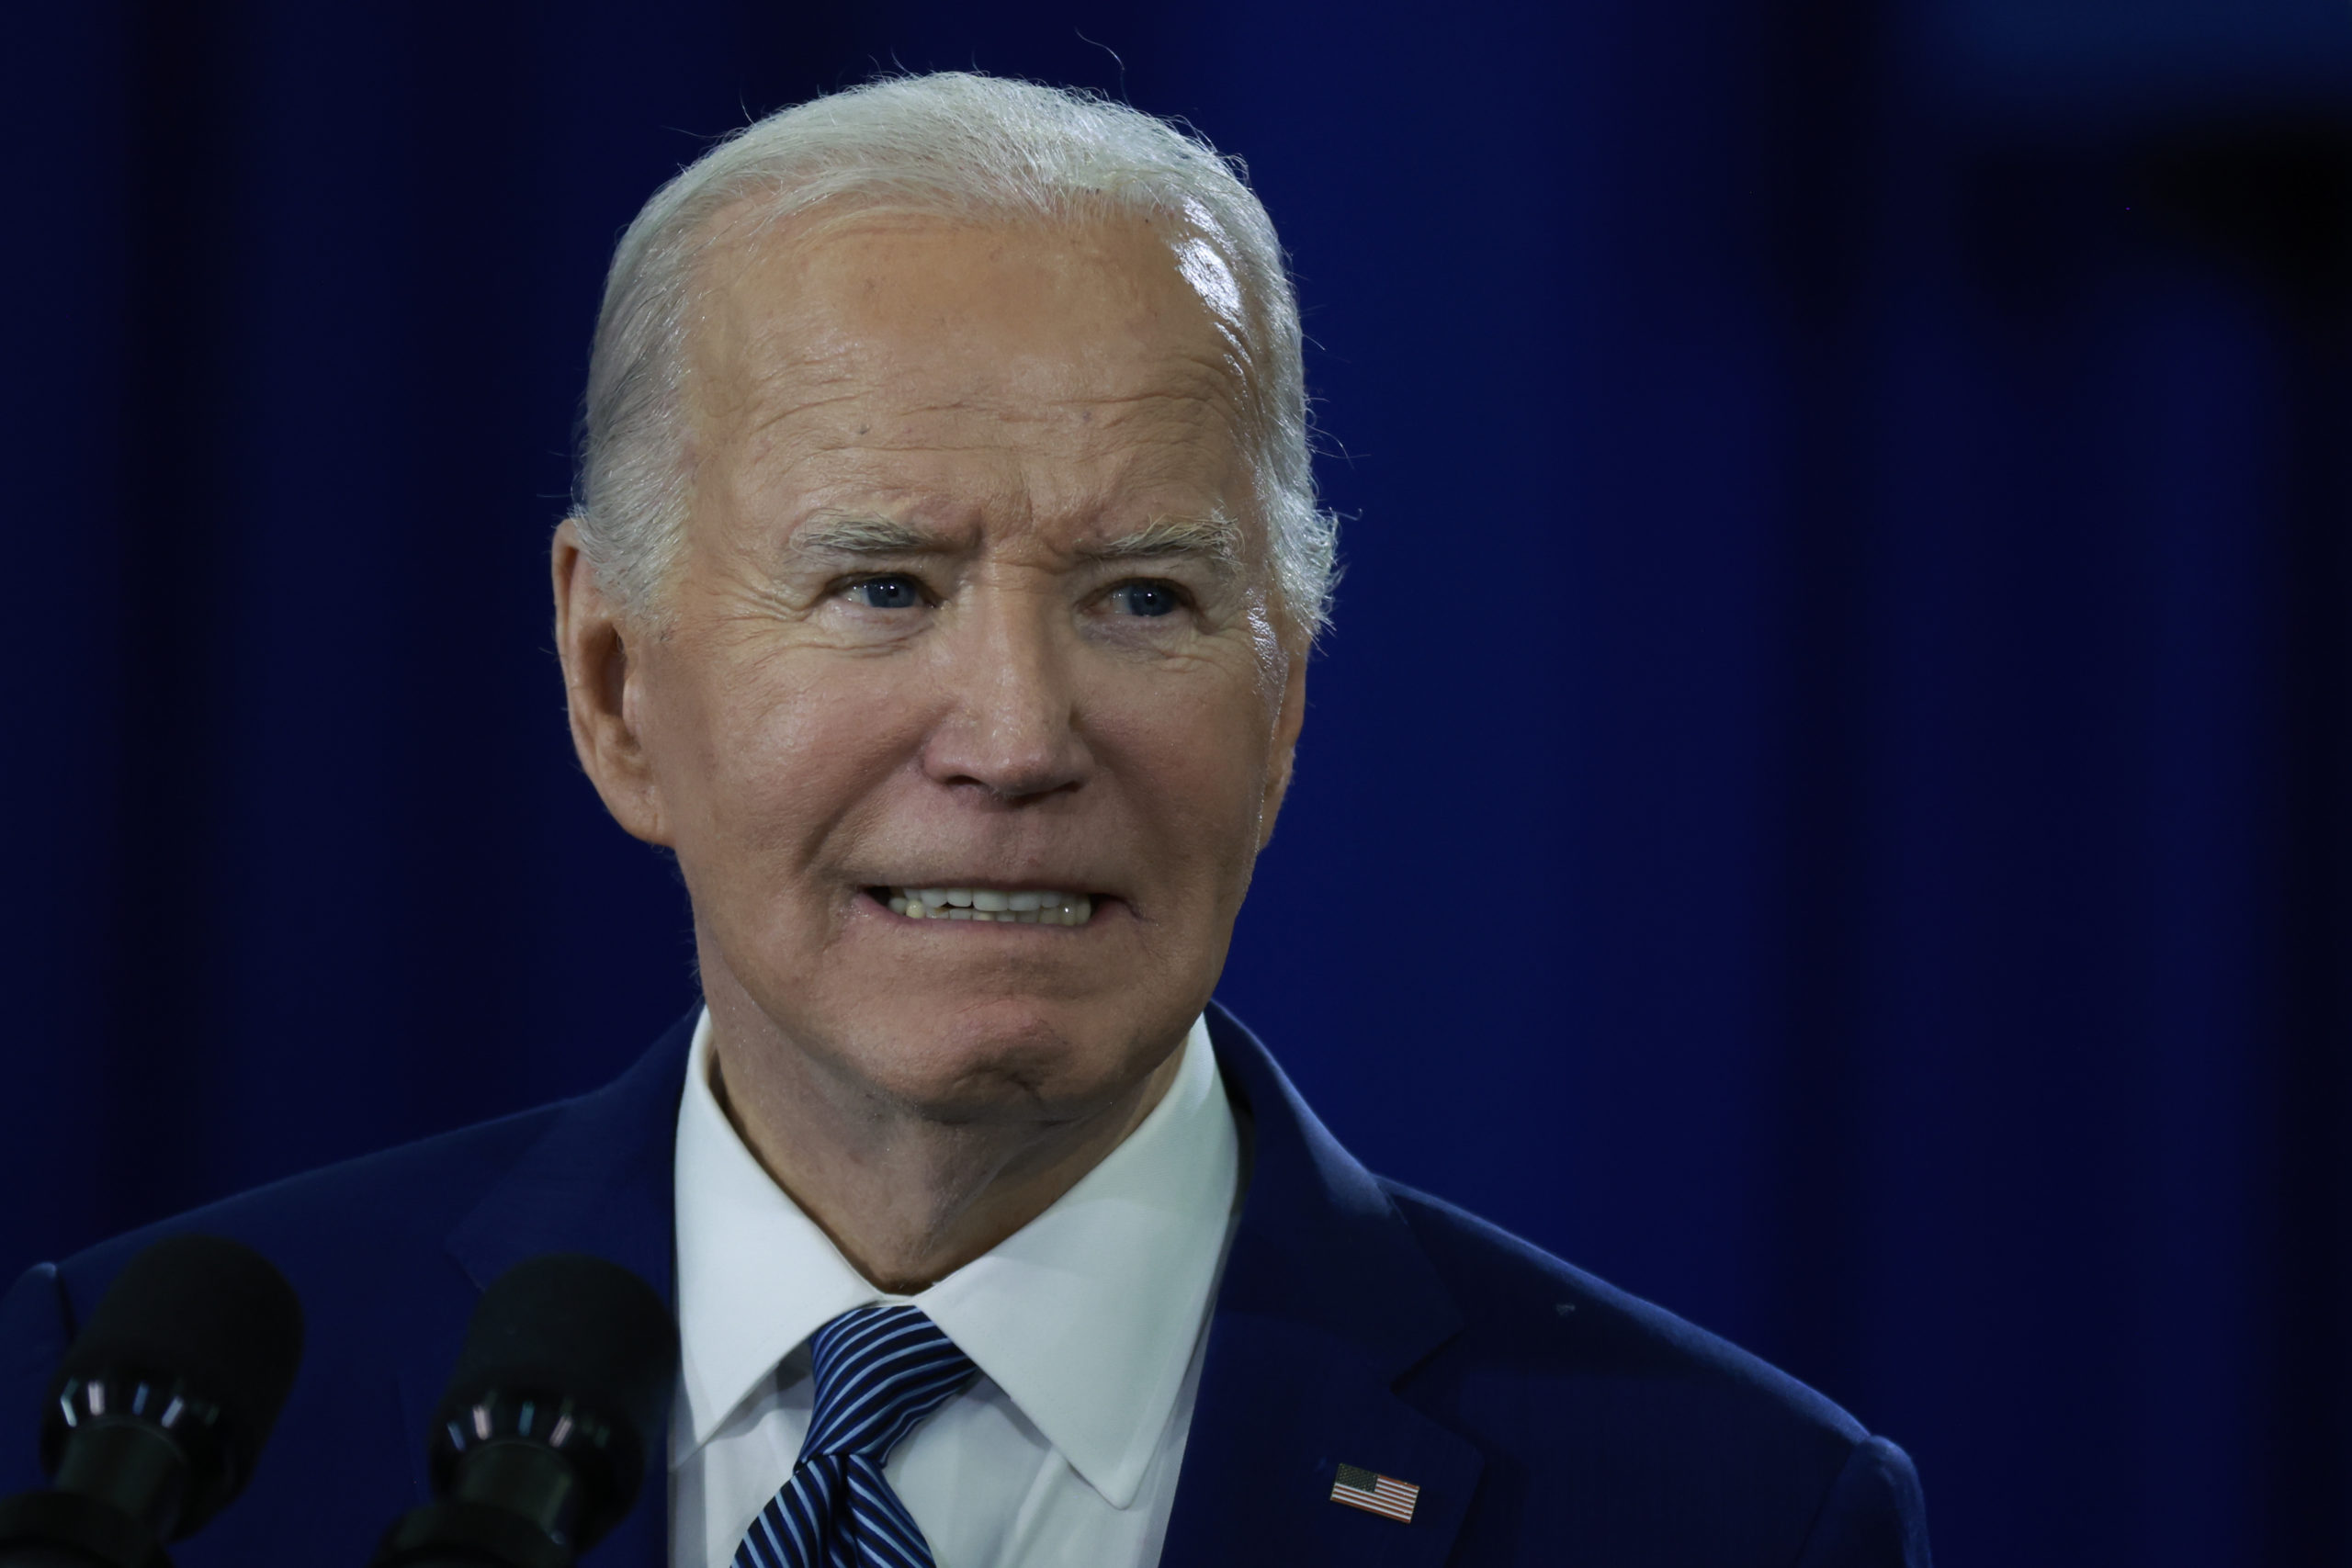 TAMPA, FLORIDA—APRIL 23: President Joe Biden speaks during a campaign stop at Hillsborough Community College’s Dale Mabry campus on April 23, 2024, in Tampa, Florida. During the event, President Biden spoke about the issue of abortion rights. (Photo by Joe Raedle/Getty Images)